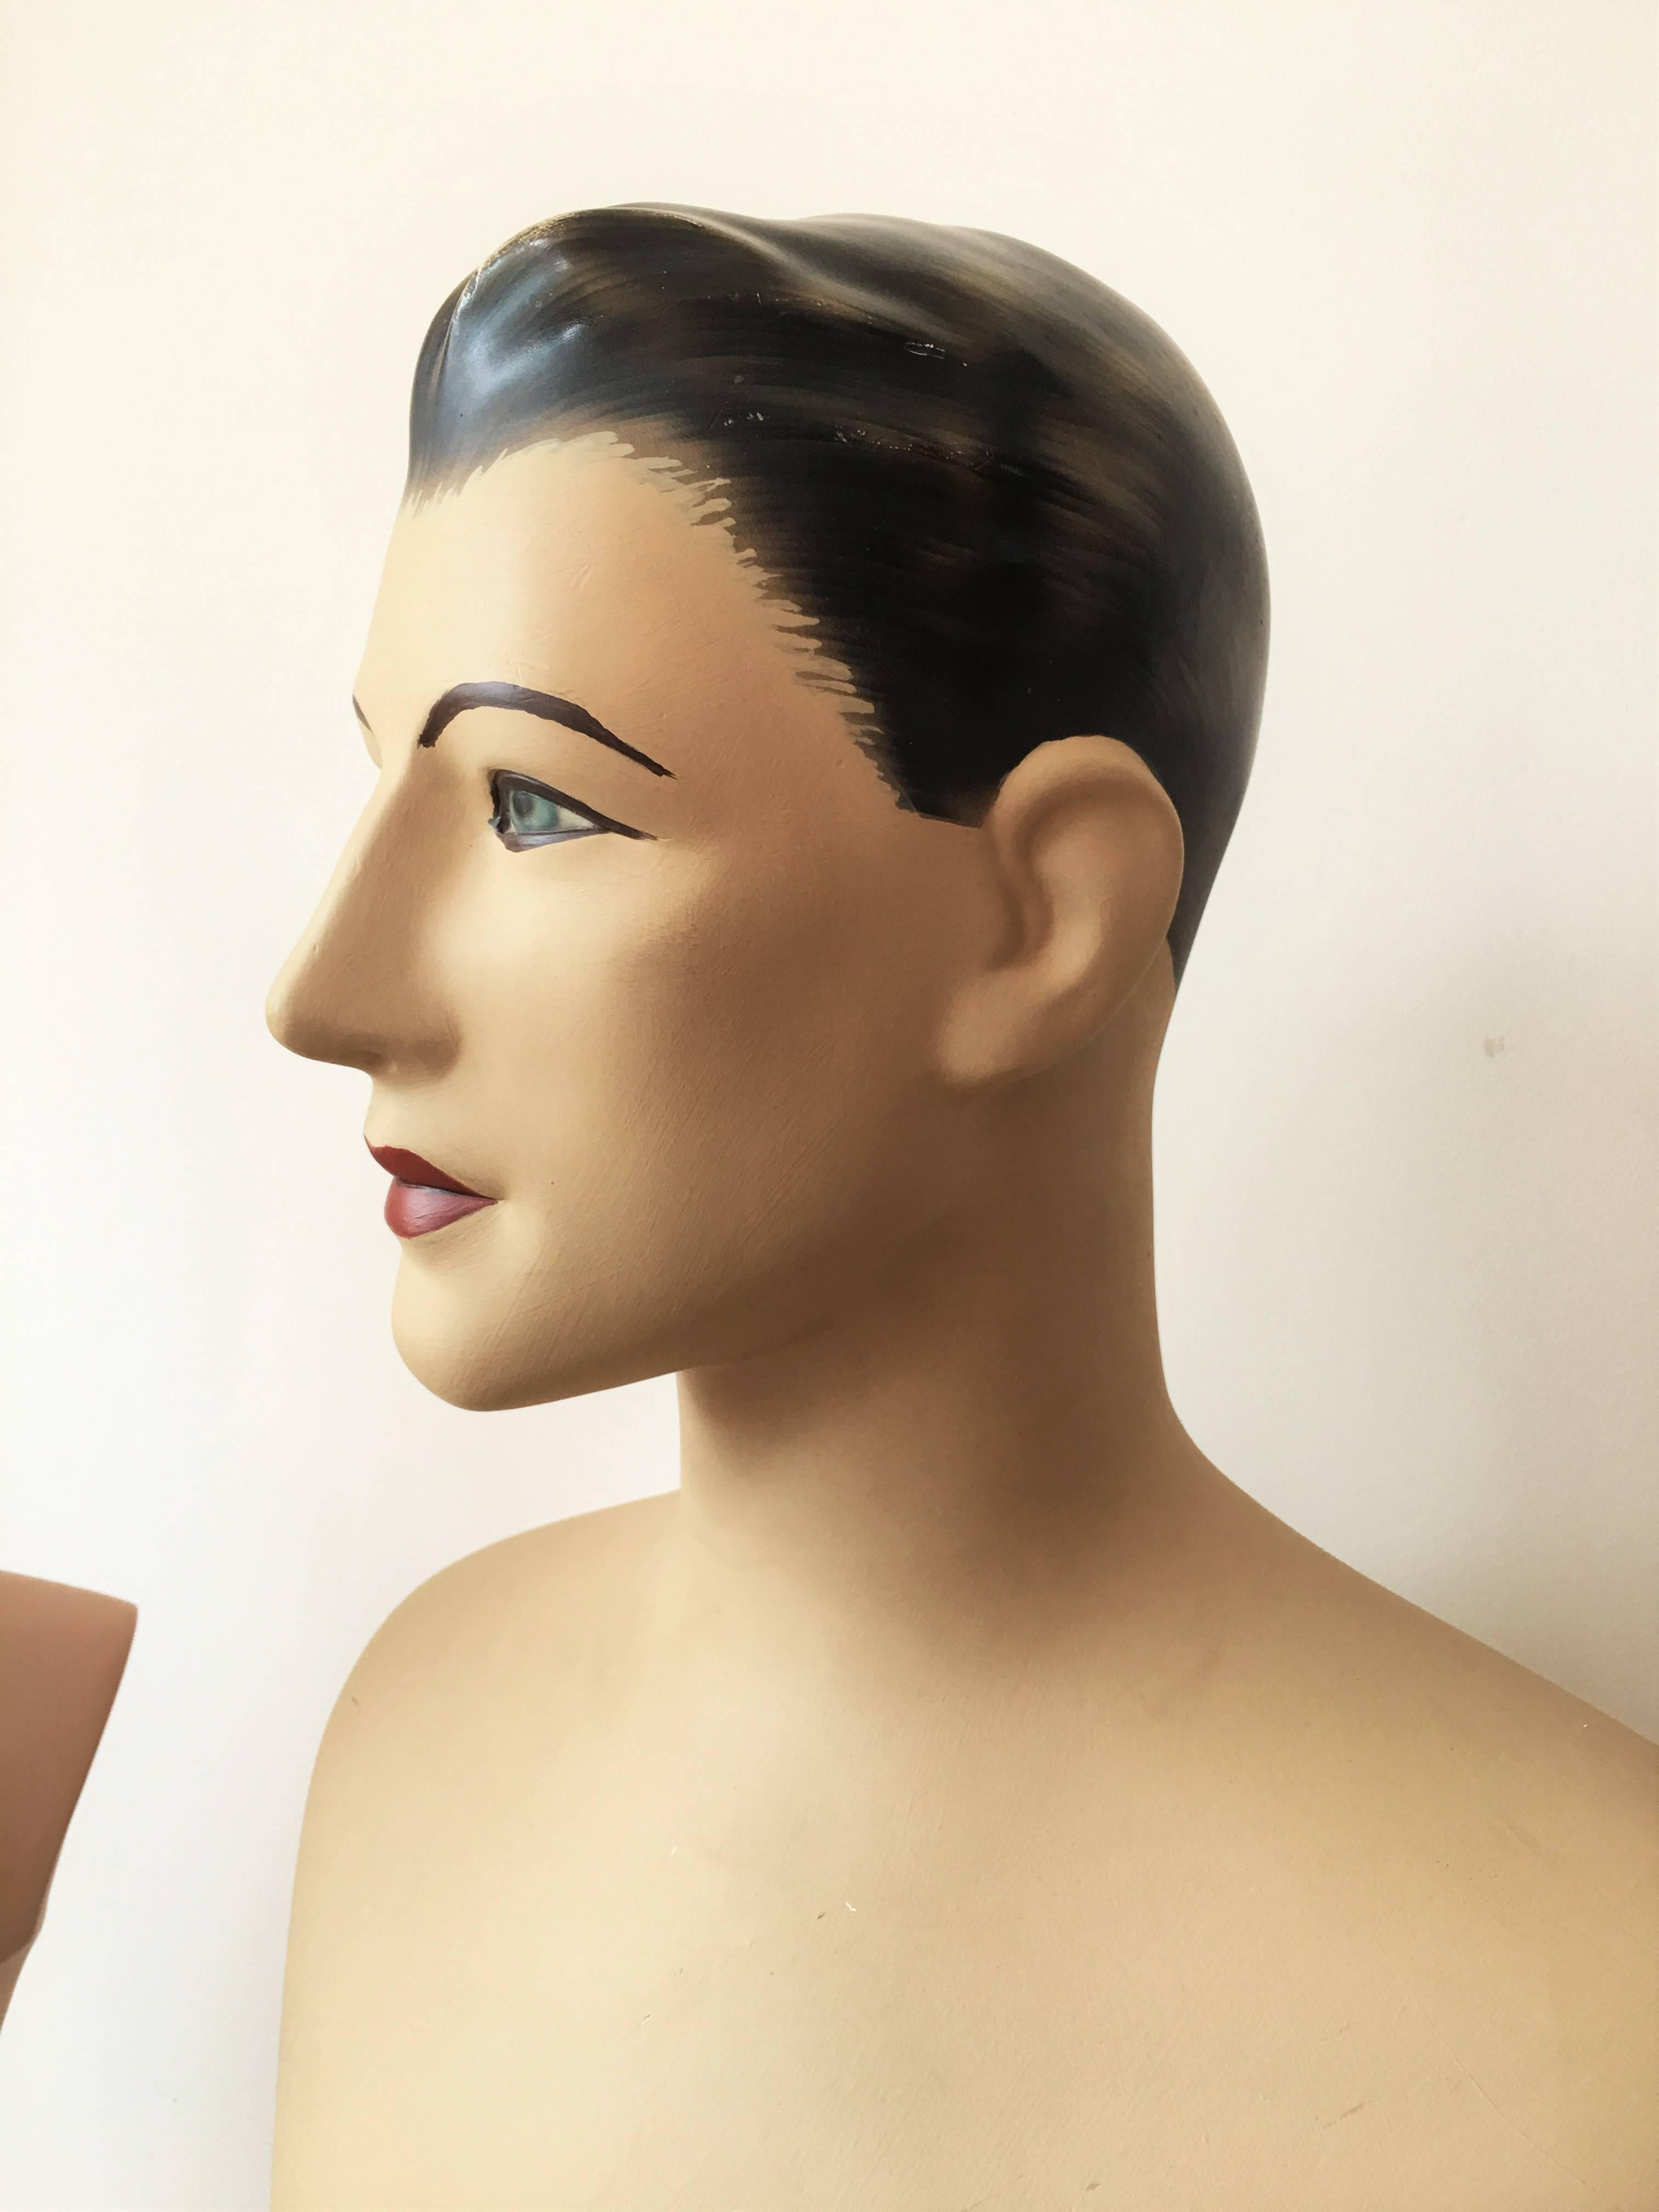 Art Deco plaster bust. Painted mannequin.
The item is on our Europe storage.